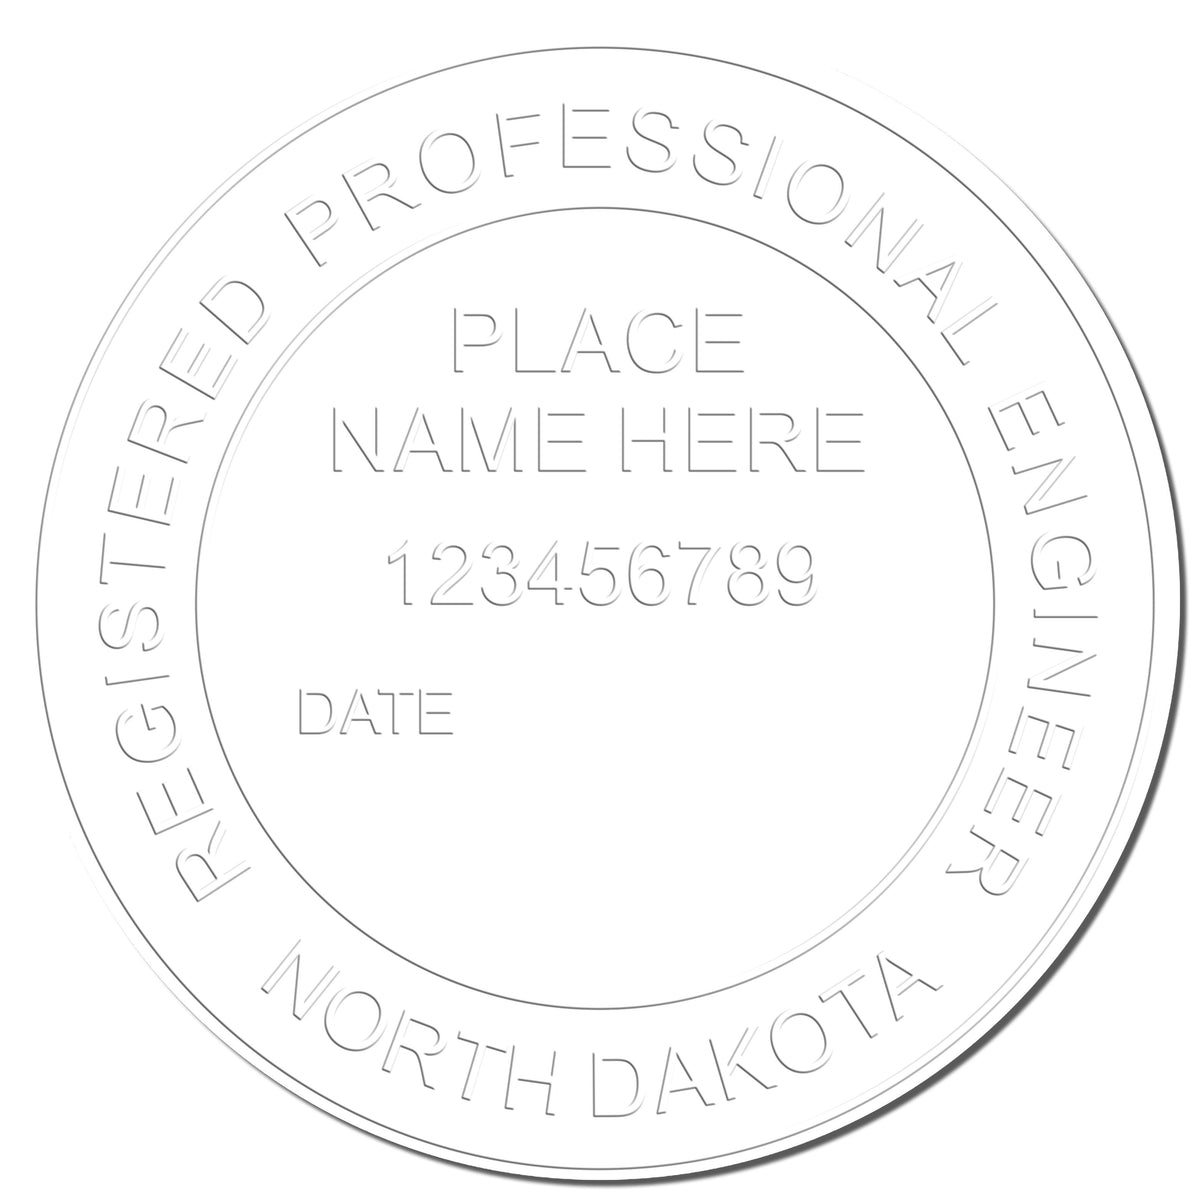 This paper is stamped with a sample imprint of the State of North Dakota Extended Long Reach Engineer Seal, signifying its quality and reliability.